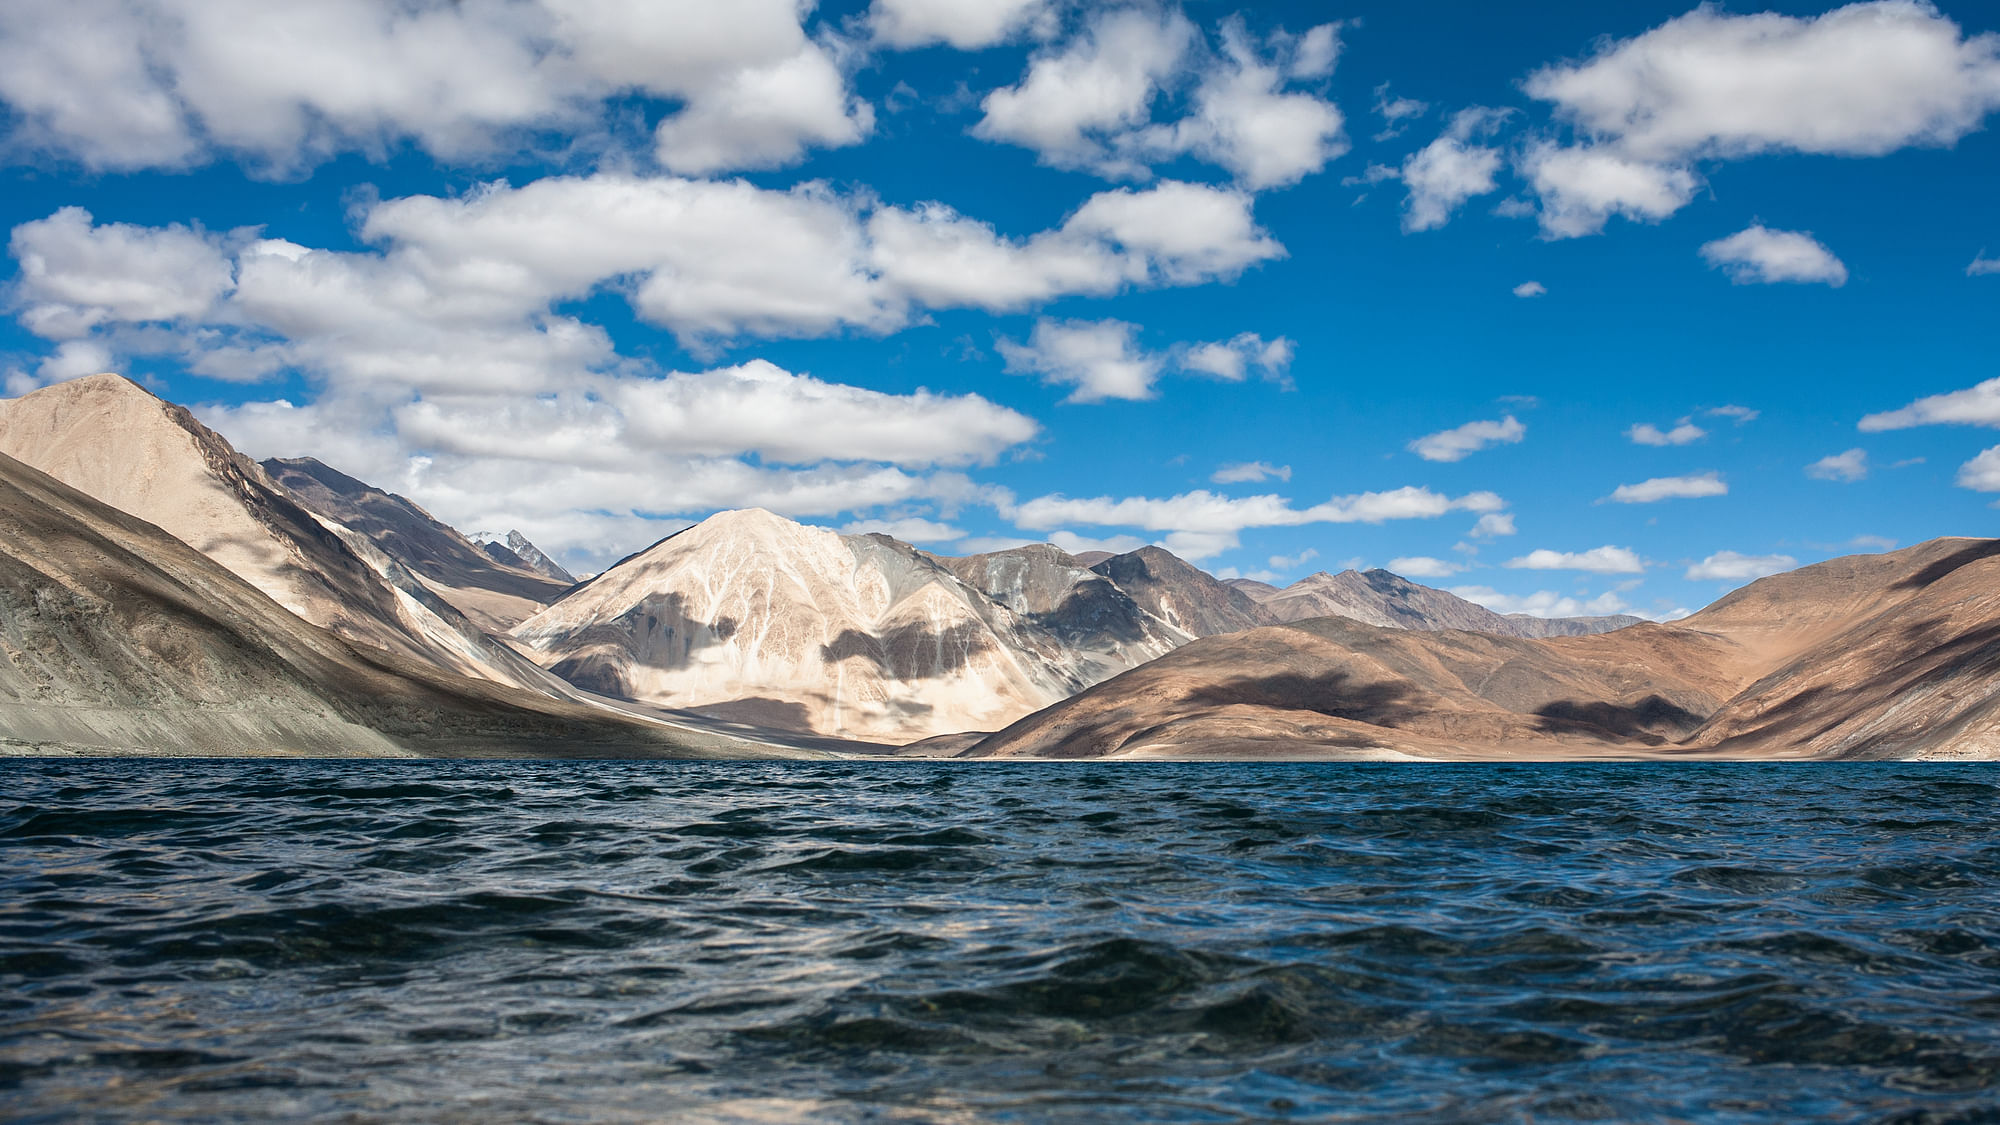 The inscriptions fall between finger 4 &amp; 5 of the disputed area near Ladakh’s Pangong Tso.